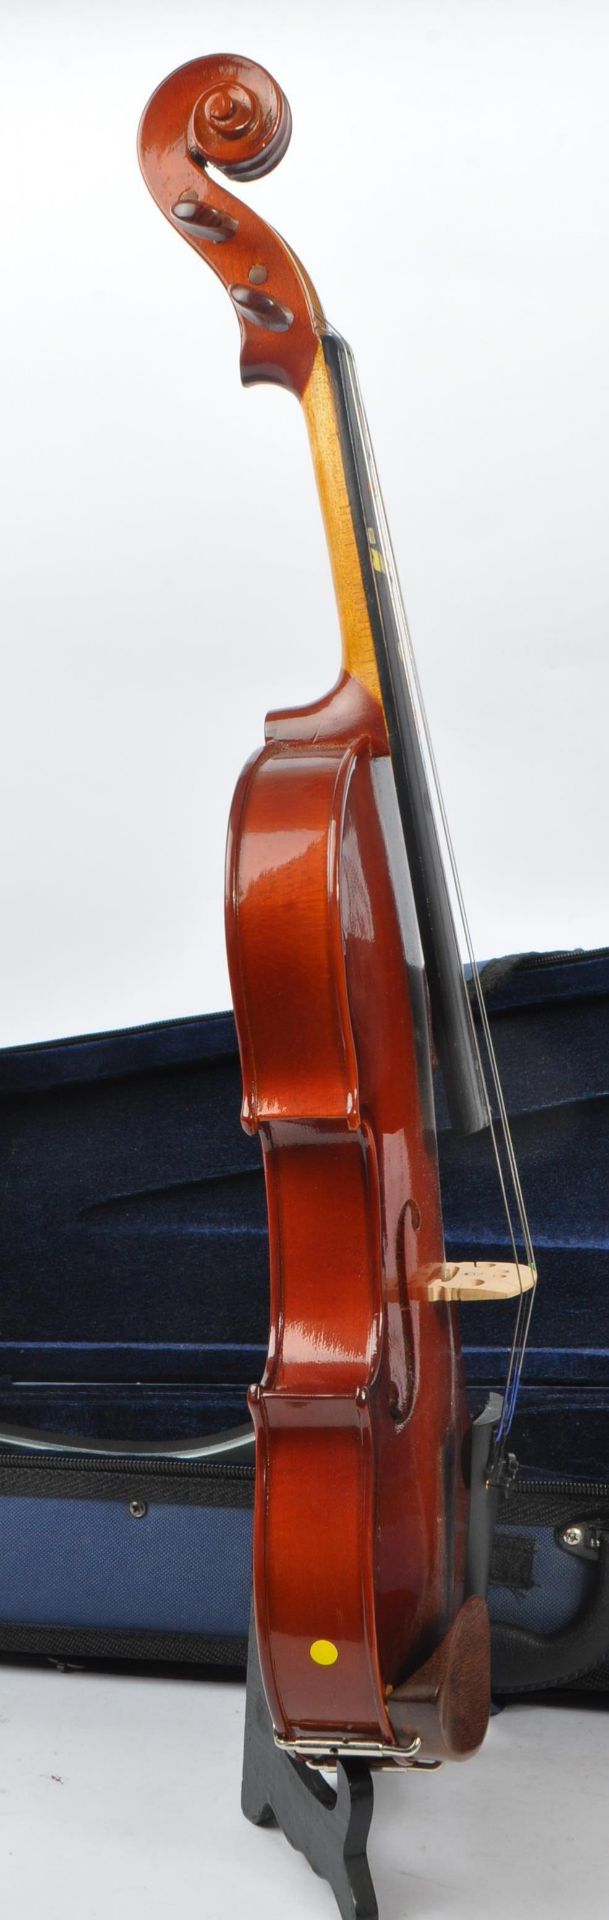 PRIMAVERA - 3/4 SIZE STUDENT VIOLIN WITH BOW & CASE - Image 4 of 5